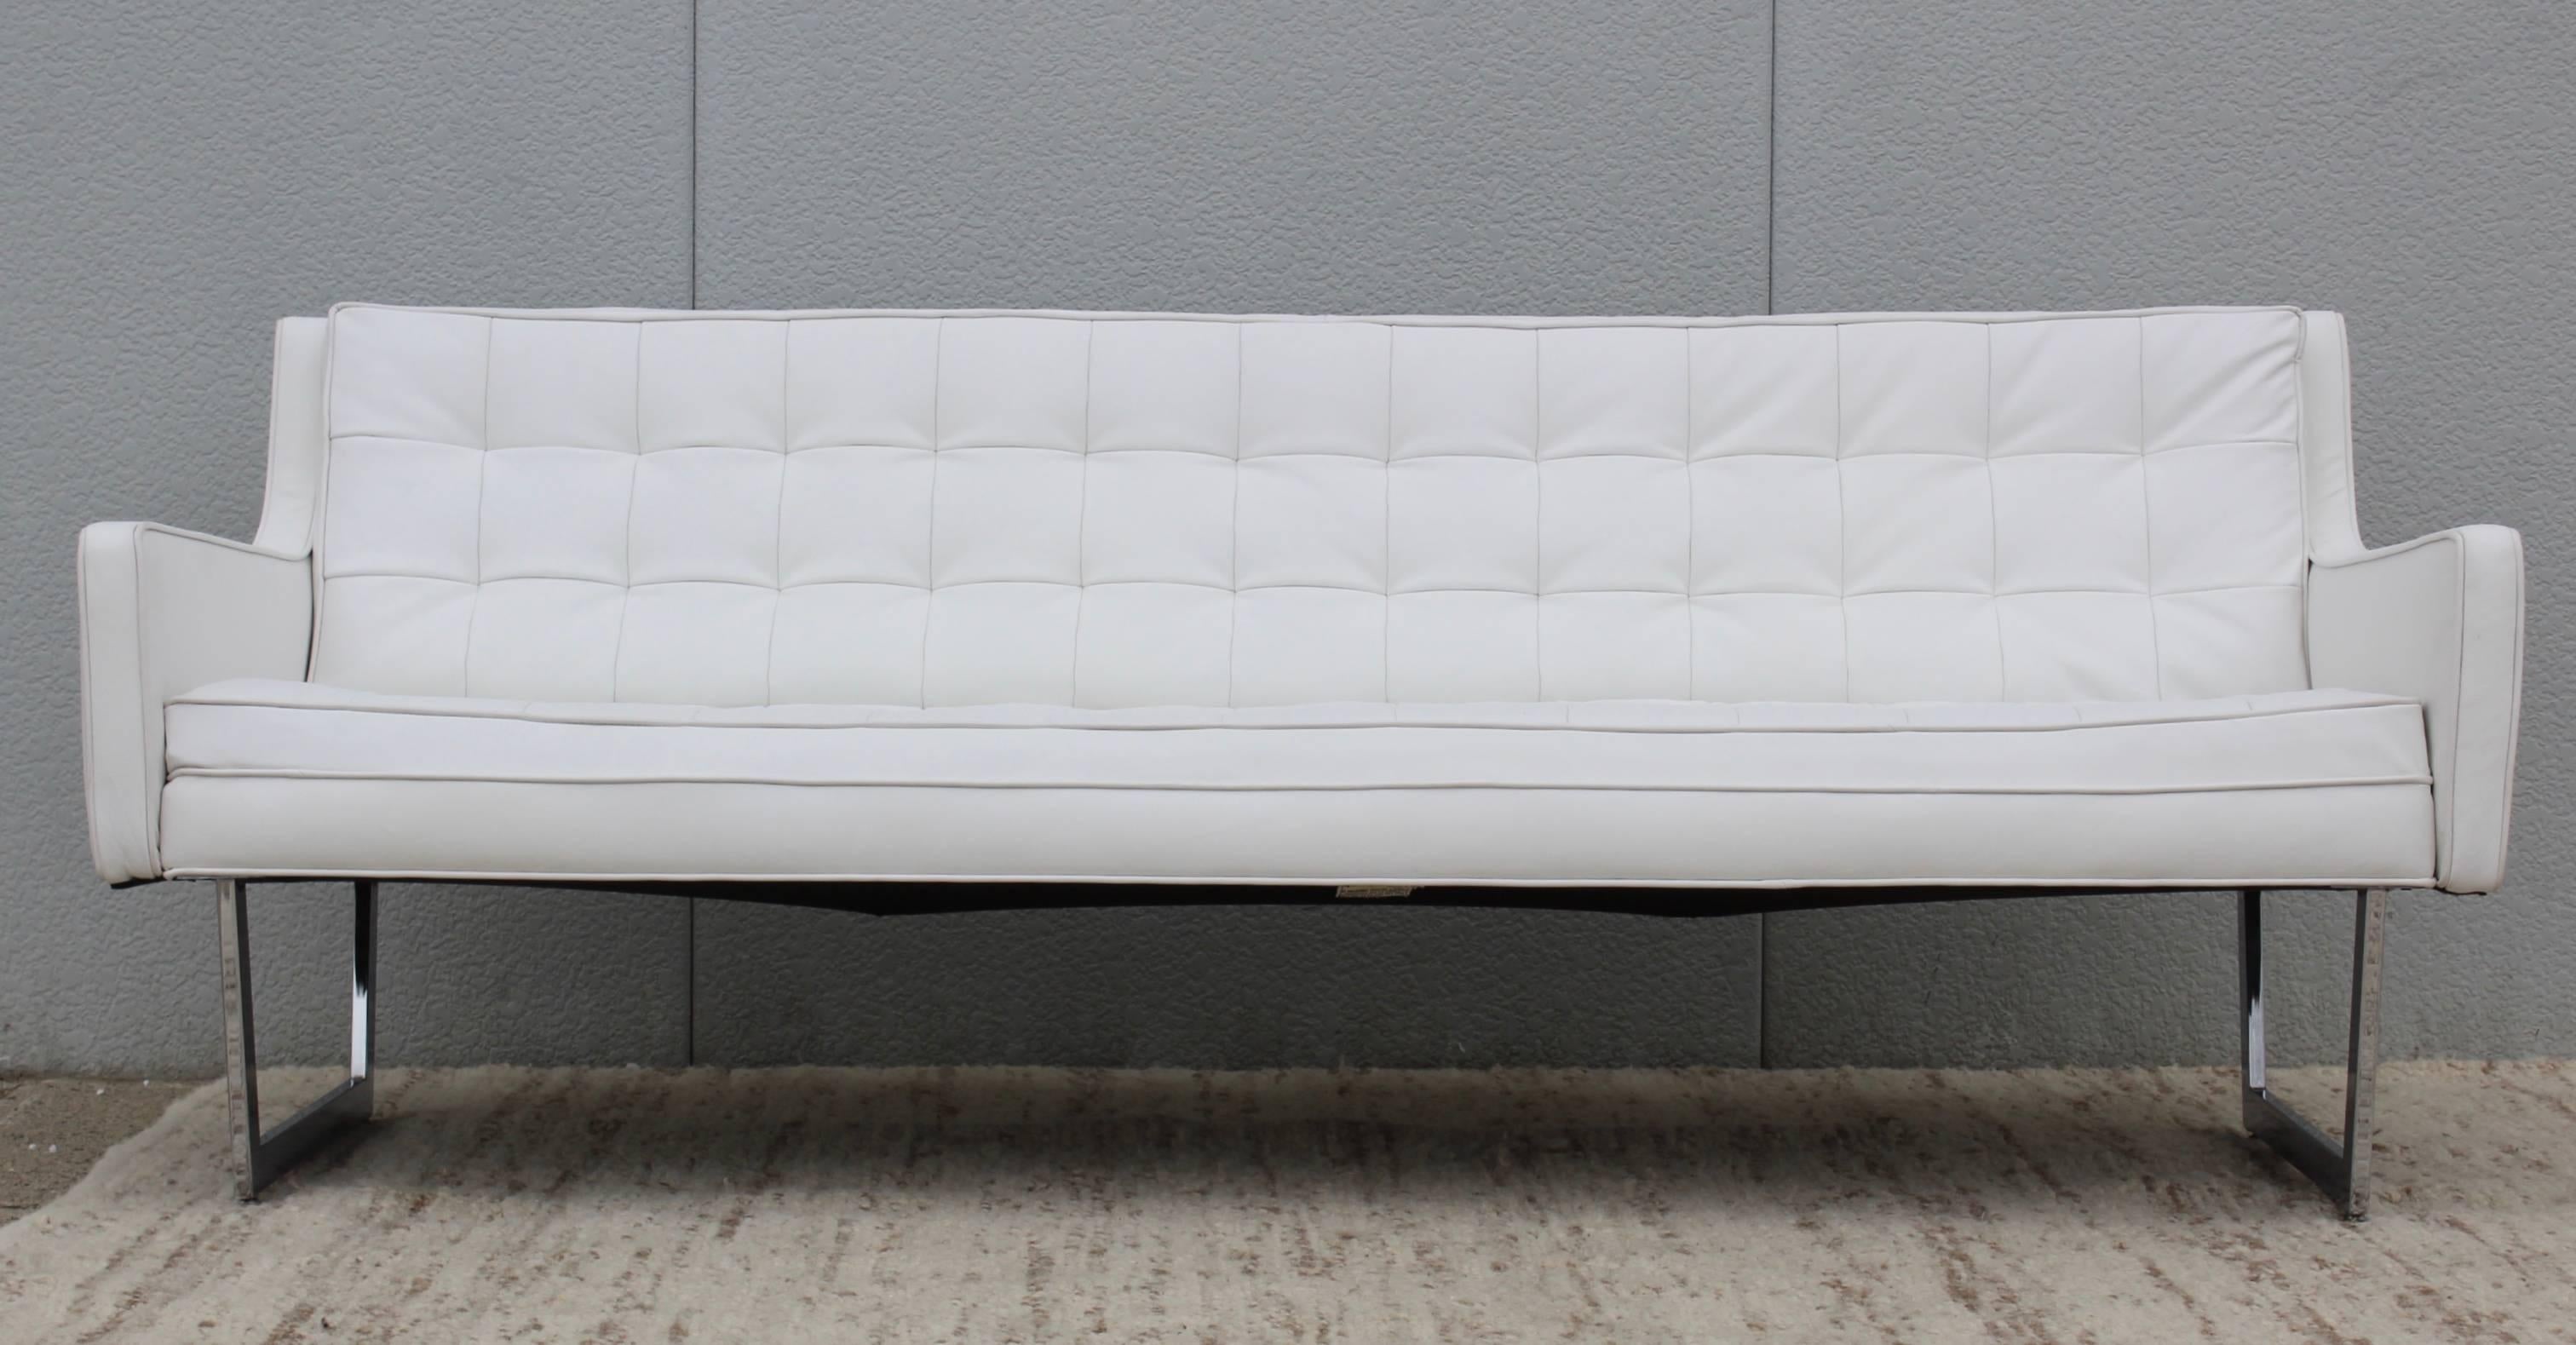 Stunning 1960s modern sofa by Patrician Furniture. Newly upholstered in white leather.